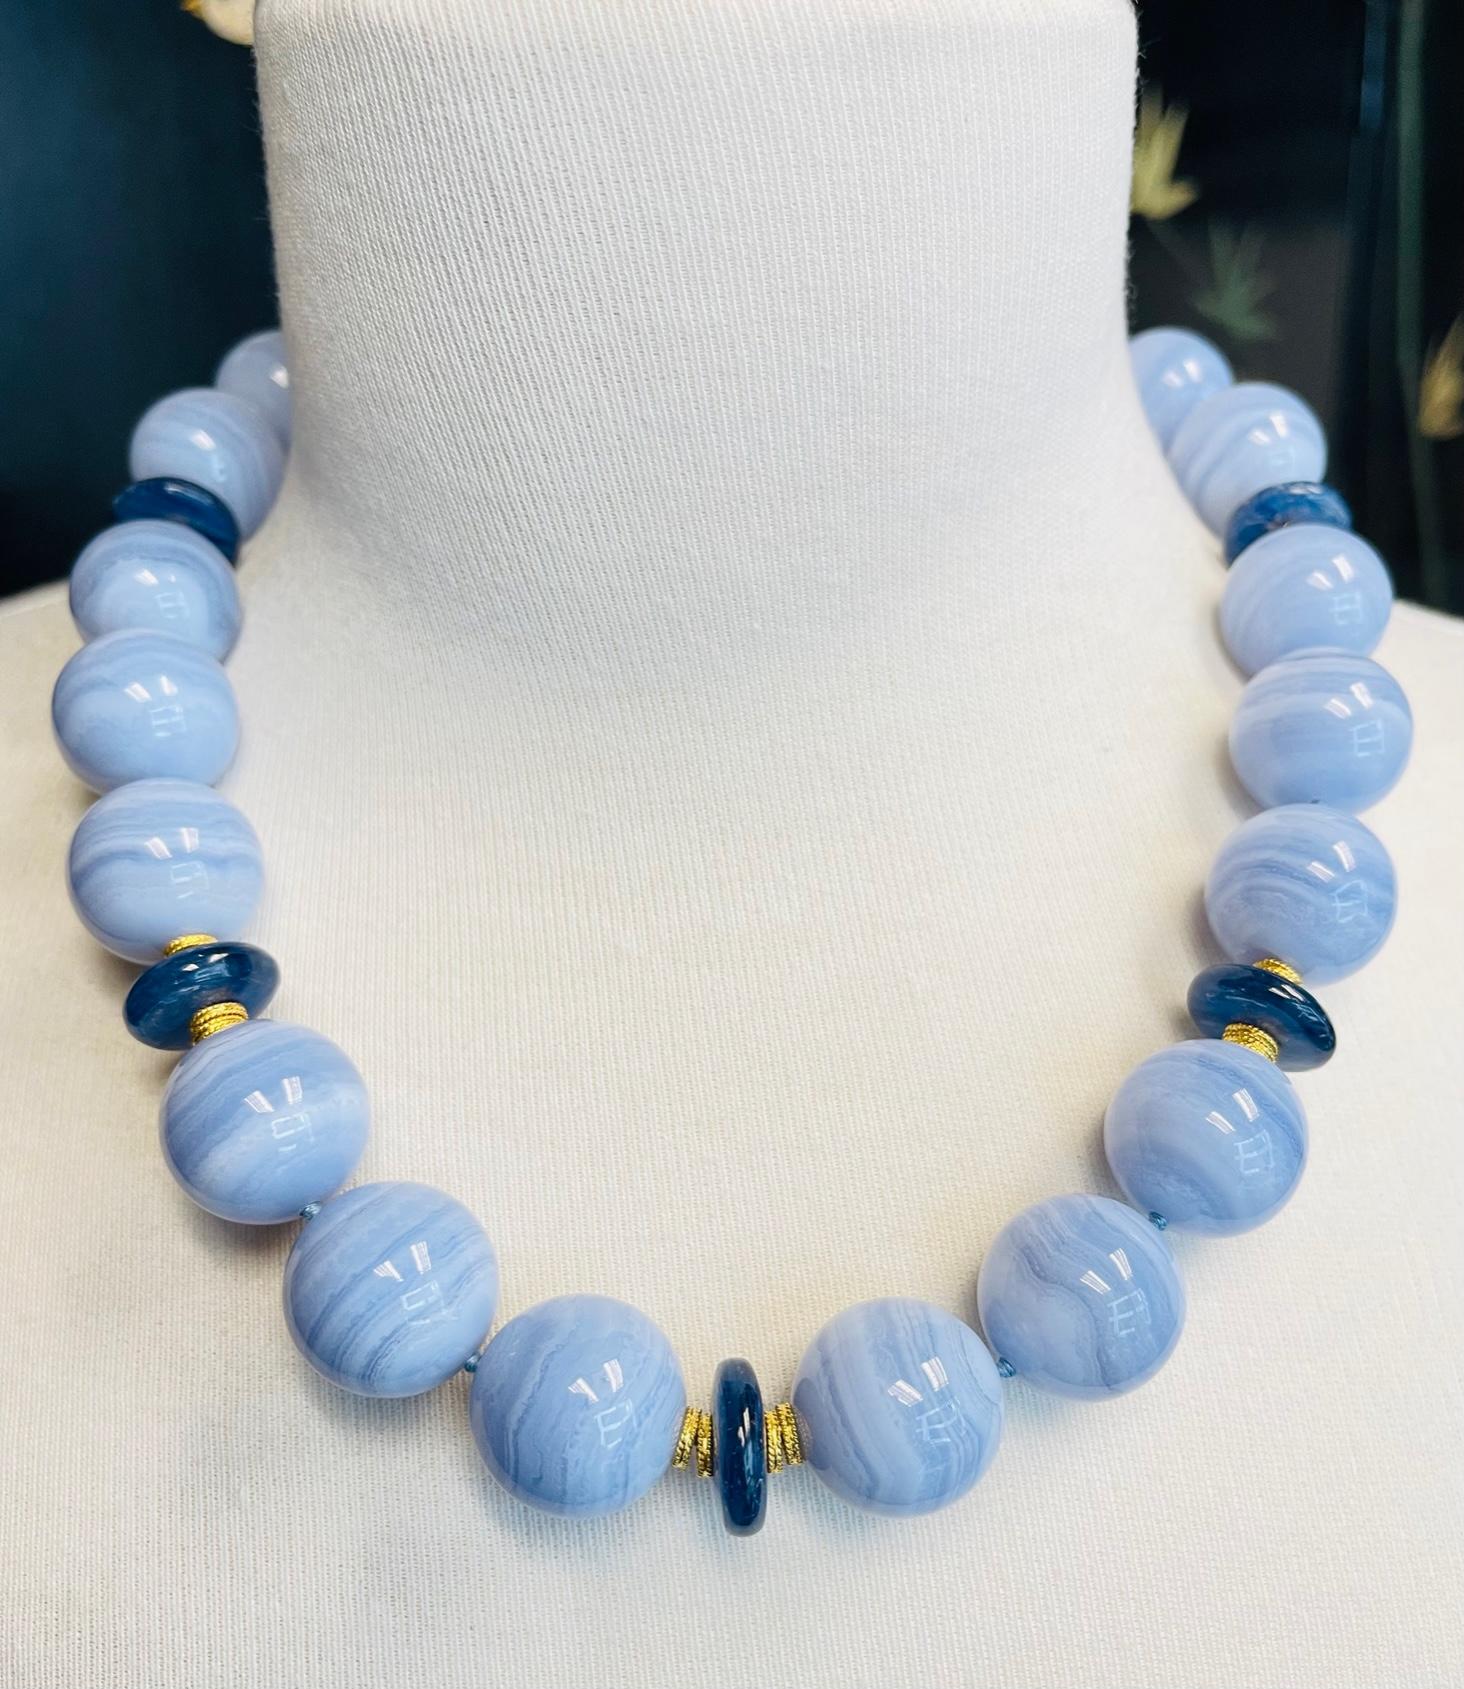 20mm Round Blue Lace Agate and Kyanite Bead Necklace with Yellow Gold Accents For Sale 1